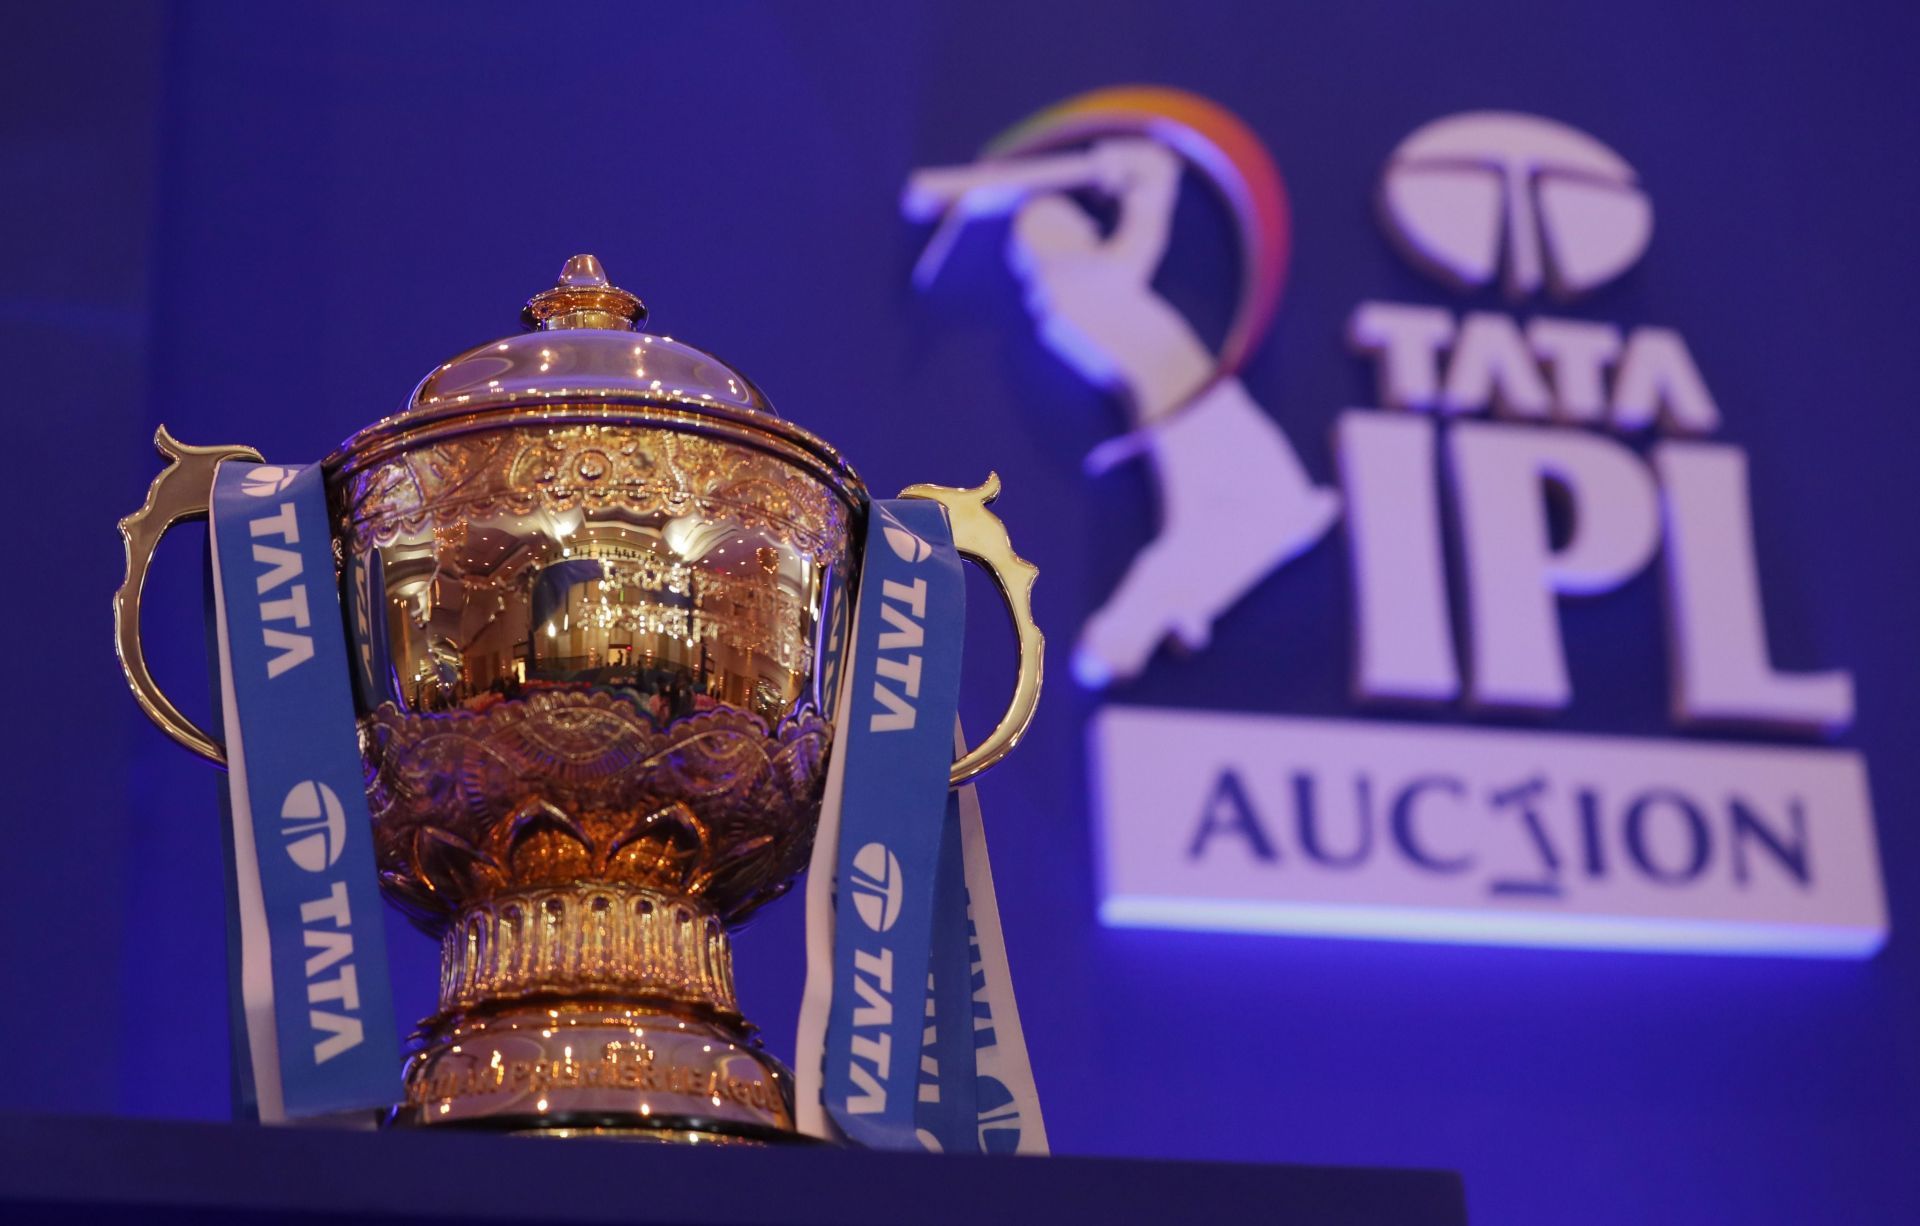 IPL 2022 auction saw 590 players go under the hammer for bidding by 10 IPL teams [P/C: iplt20.com